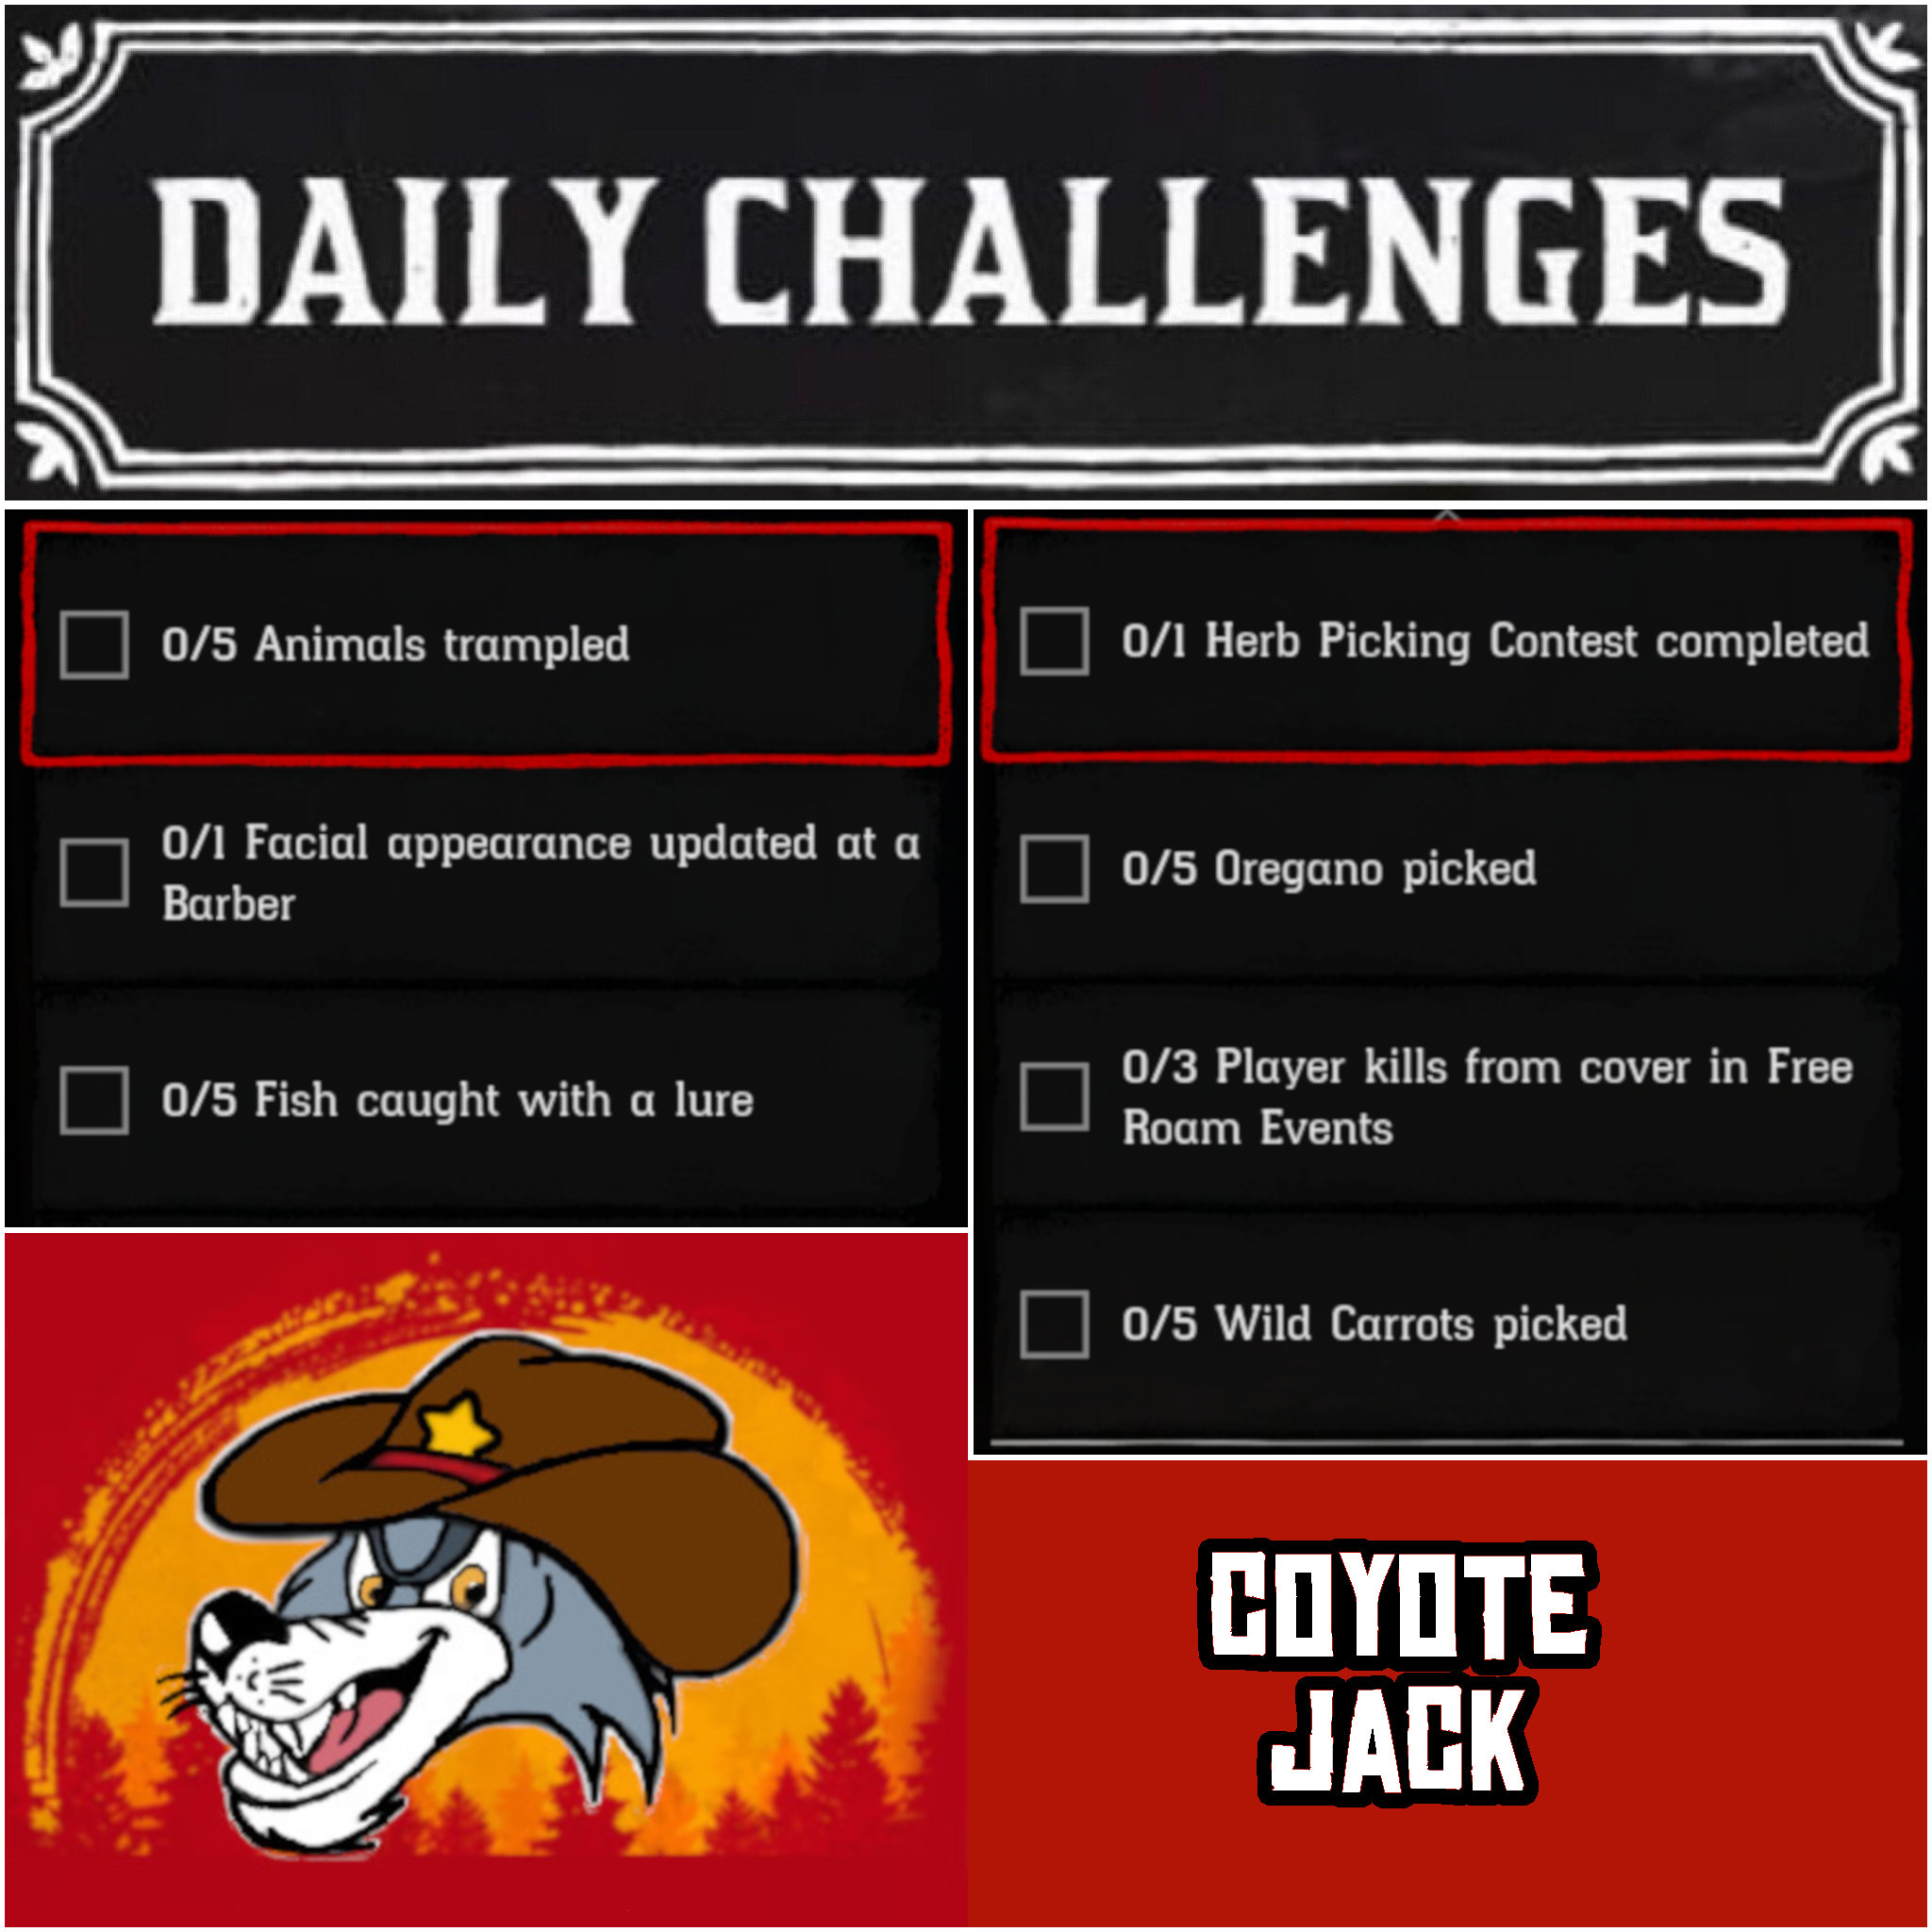 You are currently viewing Wednesday 09 December Daily Challenges